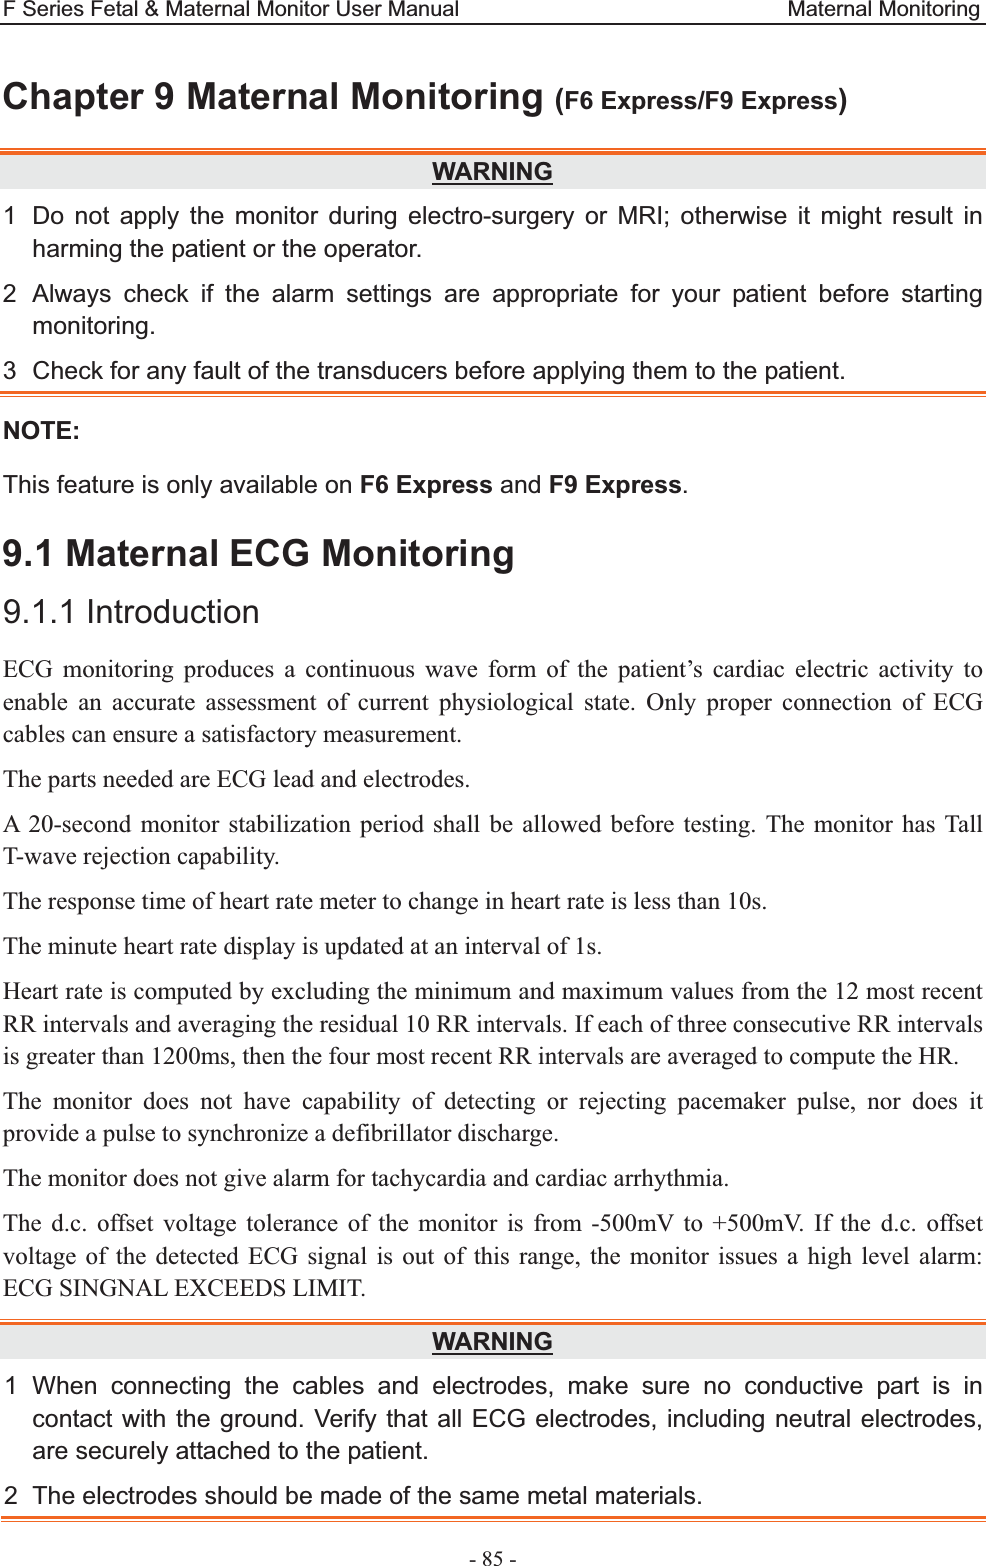 F Series Fetal &amp; Maternal Monitor User Manual                              Maternal Monitoring - 85 - Chapter 9 Maternal Monitoring (F6 Express/F9 Express)WARNING1  Do not apply the monitor during electro-surgery or MRI; otherwise it might result in harming the patient or the operator. 2  Always check if the alarm settings are appropriate for your patient before starting monitoring. 3  Check for any fault of the transducers before applying them to the patient. NOTE: This feature is only available on F6 Express and F9 Express. 9.1 Maternal ECG Monitoring 9.1.1 Introduction ECG monitoring produces a continuous wave form of the patient’s cardiac electric activity to enable an accurate assessment of current physiological state. Only proper connection of ECG cables can ensure a satisfactory measurement. The parts needed are ECG lead and electrodes. A 20-second monitor stabilization period shall be allowed before testing. The monitor has Tall T-wave rejection capability. The response time of heart rate meter to change in heart rate is less than 10s. The minute heart rate display is updated at an interval of 1s. Heart rate is computed by excluding the minimum and maximum values from the 12 most recent RR intervals and averaging the residual 10 RR intervals. If each of three consecutive RR intervals is greater than 1200ms, then the four most recent RR intervals are averaged to compute the HR. The monitor does not have capability of detecting or rejecting pacemaker pulse, nor does it provide a pulse to synchronize a defibrillator discharge. The monitor does not give alarm for tachycardia and cardiac arrhythmia. The d.c. offset voltage tolerance of the monitor is from -500mV to +500mV. If the d.c. offset voltage of the detected ECG signal is out of this range, the monitor issues a high level alarm: ECG SINGNAL EXCEEDS LIMIT. WARNING1 When connecting the cables and electrodes, make sure no conductive part is in contact with the ground. Verify that all ECG electrodes, including neutral electrodes, are securely attached to the patient. 2  The electrodes should be made of the same metal materials. 